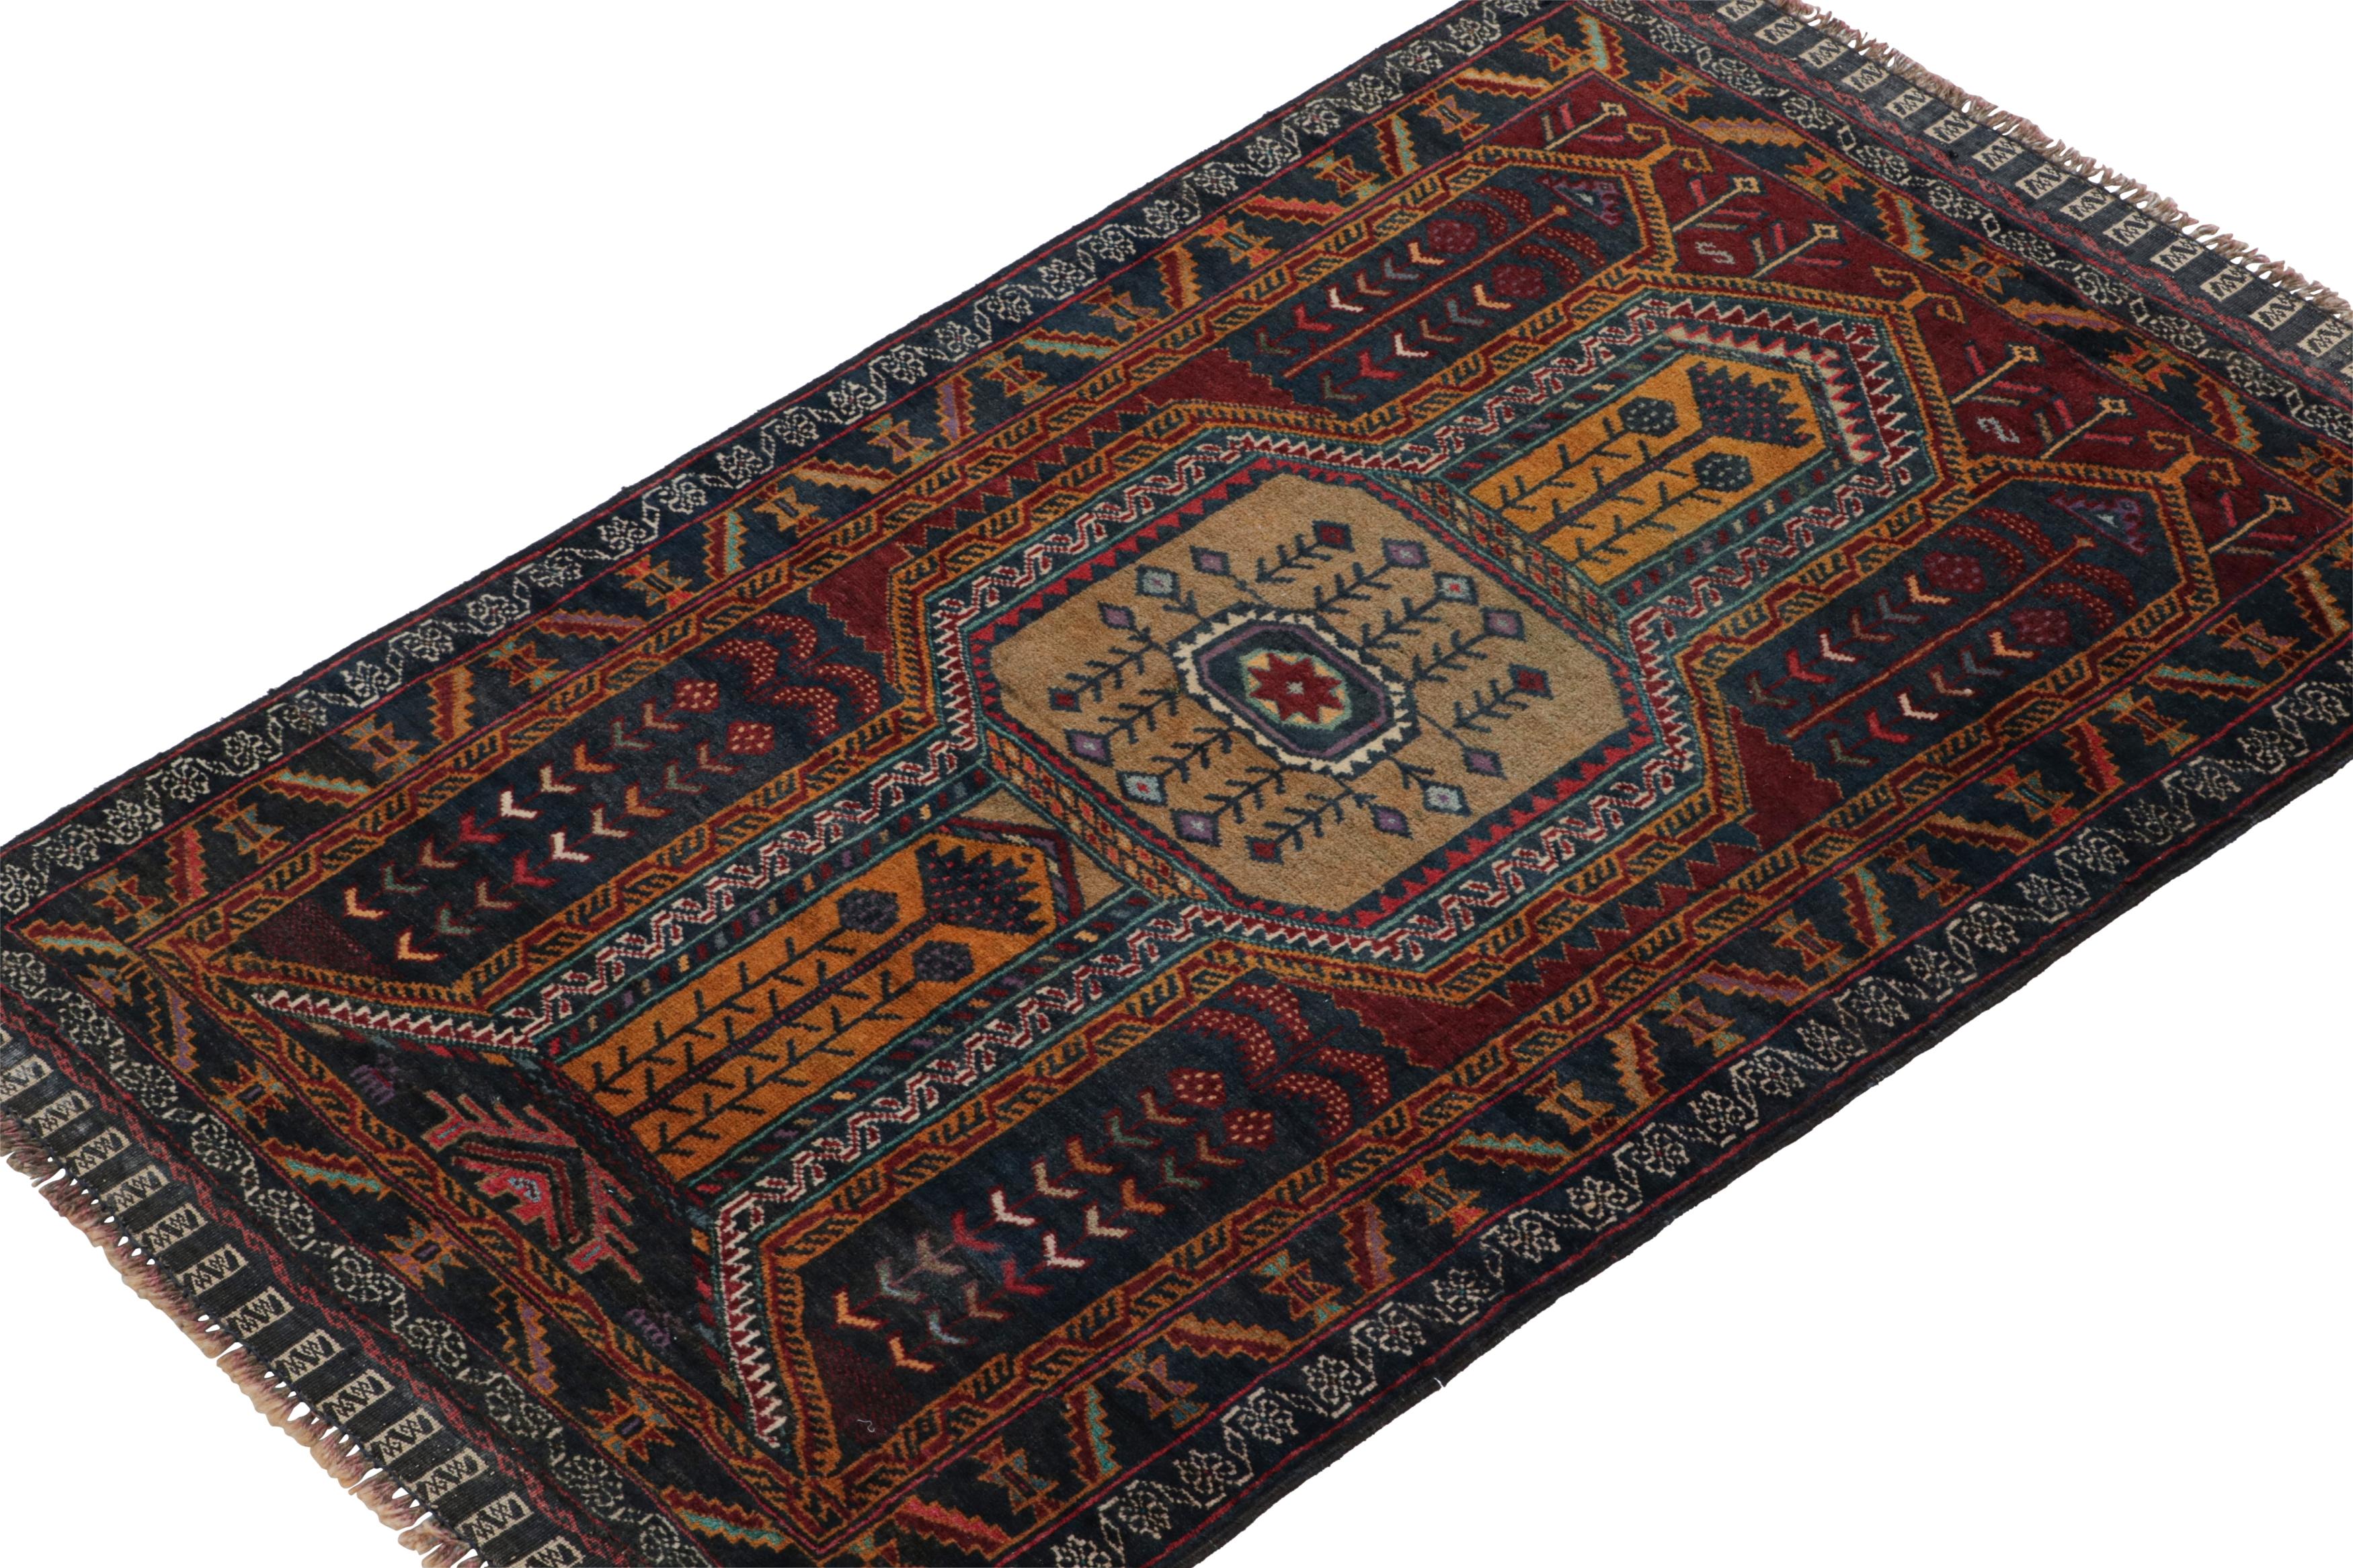 Hand-knotted in wool, this 3x4 Baluch Persian rug of the 1950s is the latest to enter Rug & Kilim’s Antique & Vintage collection.

On the Design:

The piece carries tribal patterns in rich tones of red, blue, brown & gold. A keen eye will note that